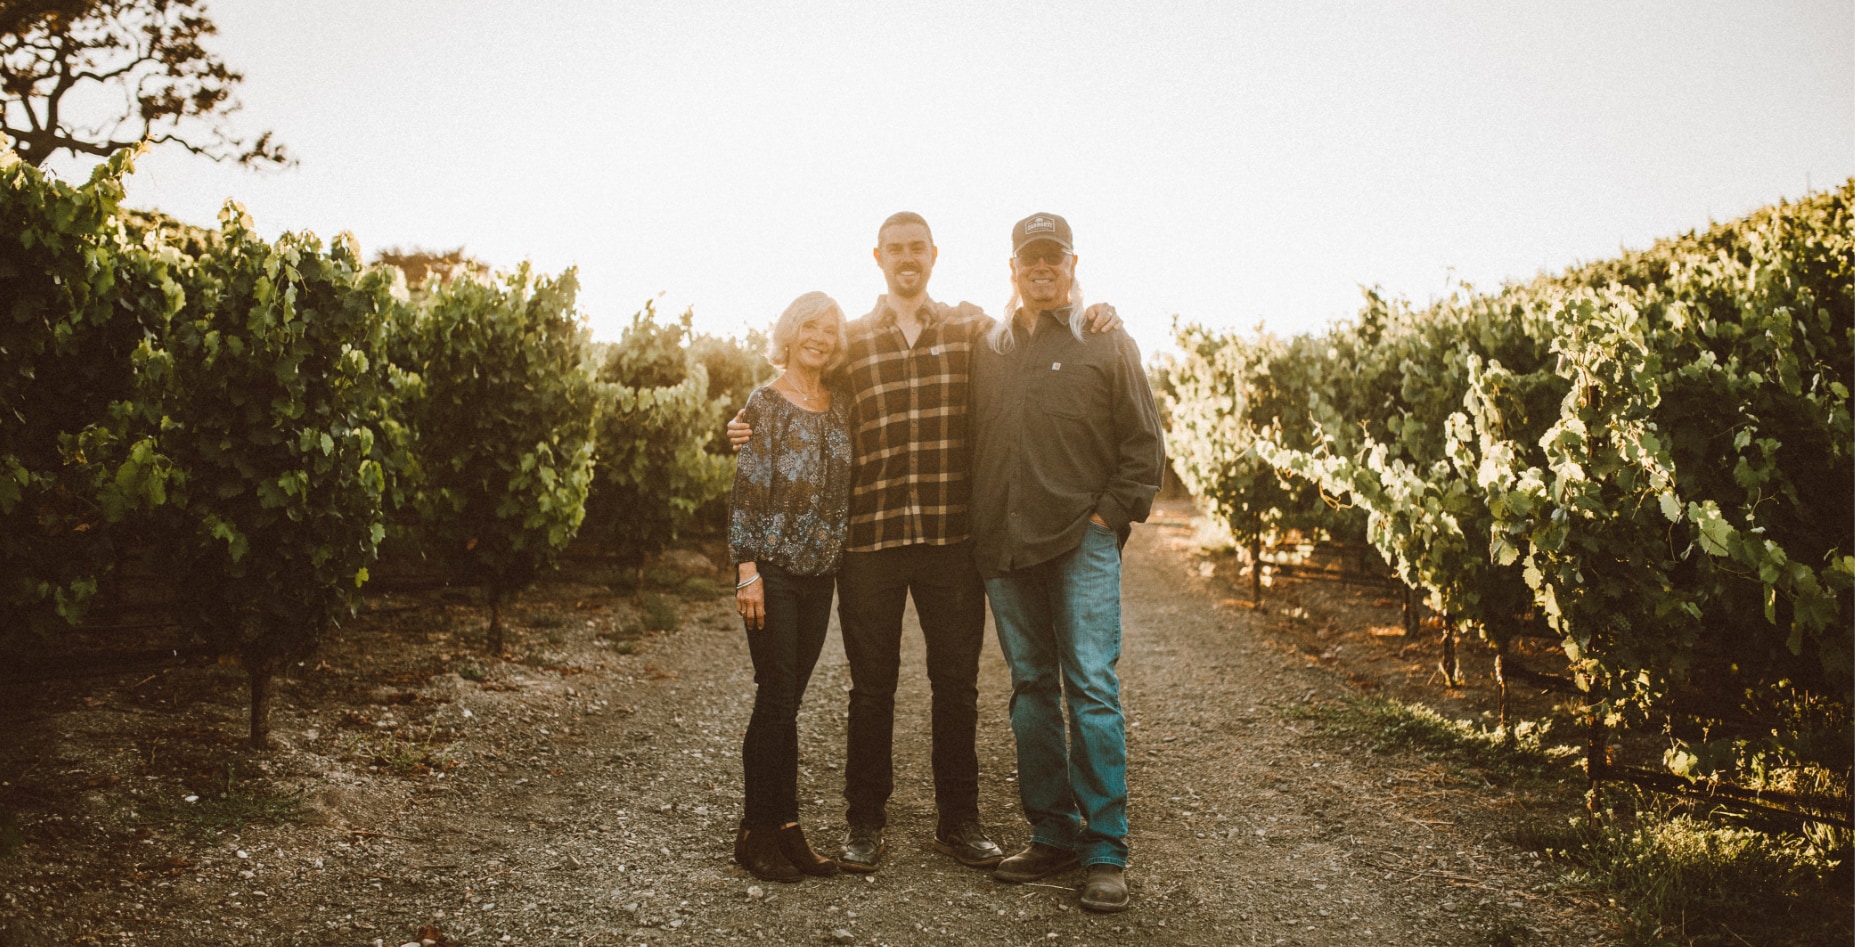 Brooke, Chase and Mike Carhartt in Vineyard